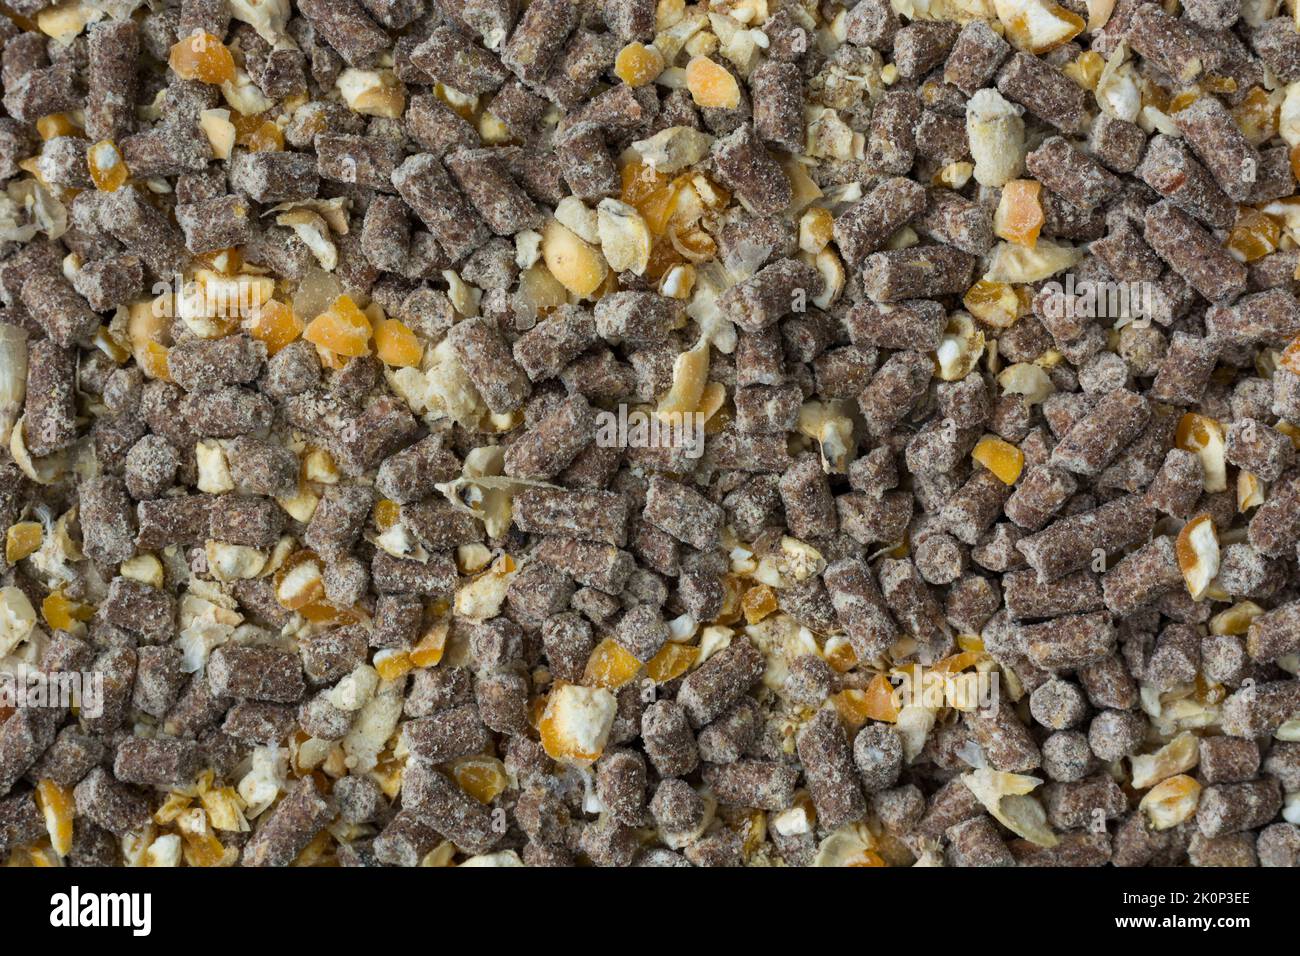 chicken feed, pellets mixed with chicken scratch or cracked corn with other grains, pelleted or granulated rations,close-up macro full frame Stock Photo